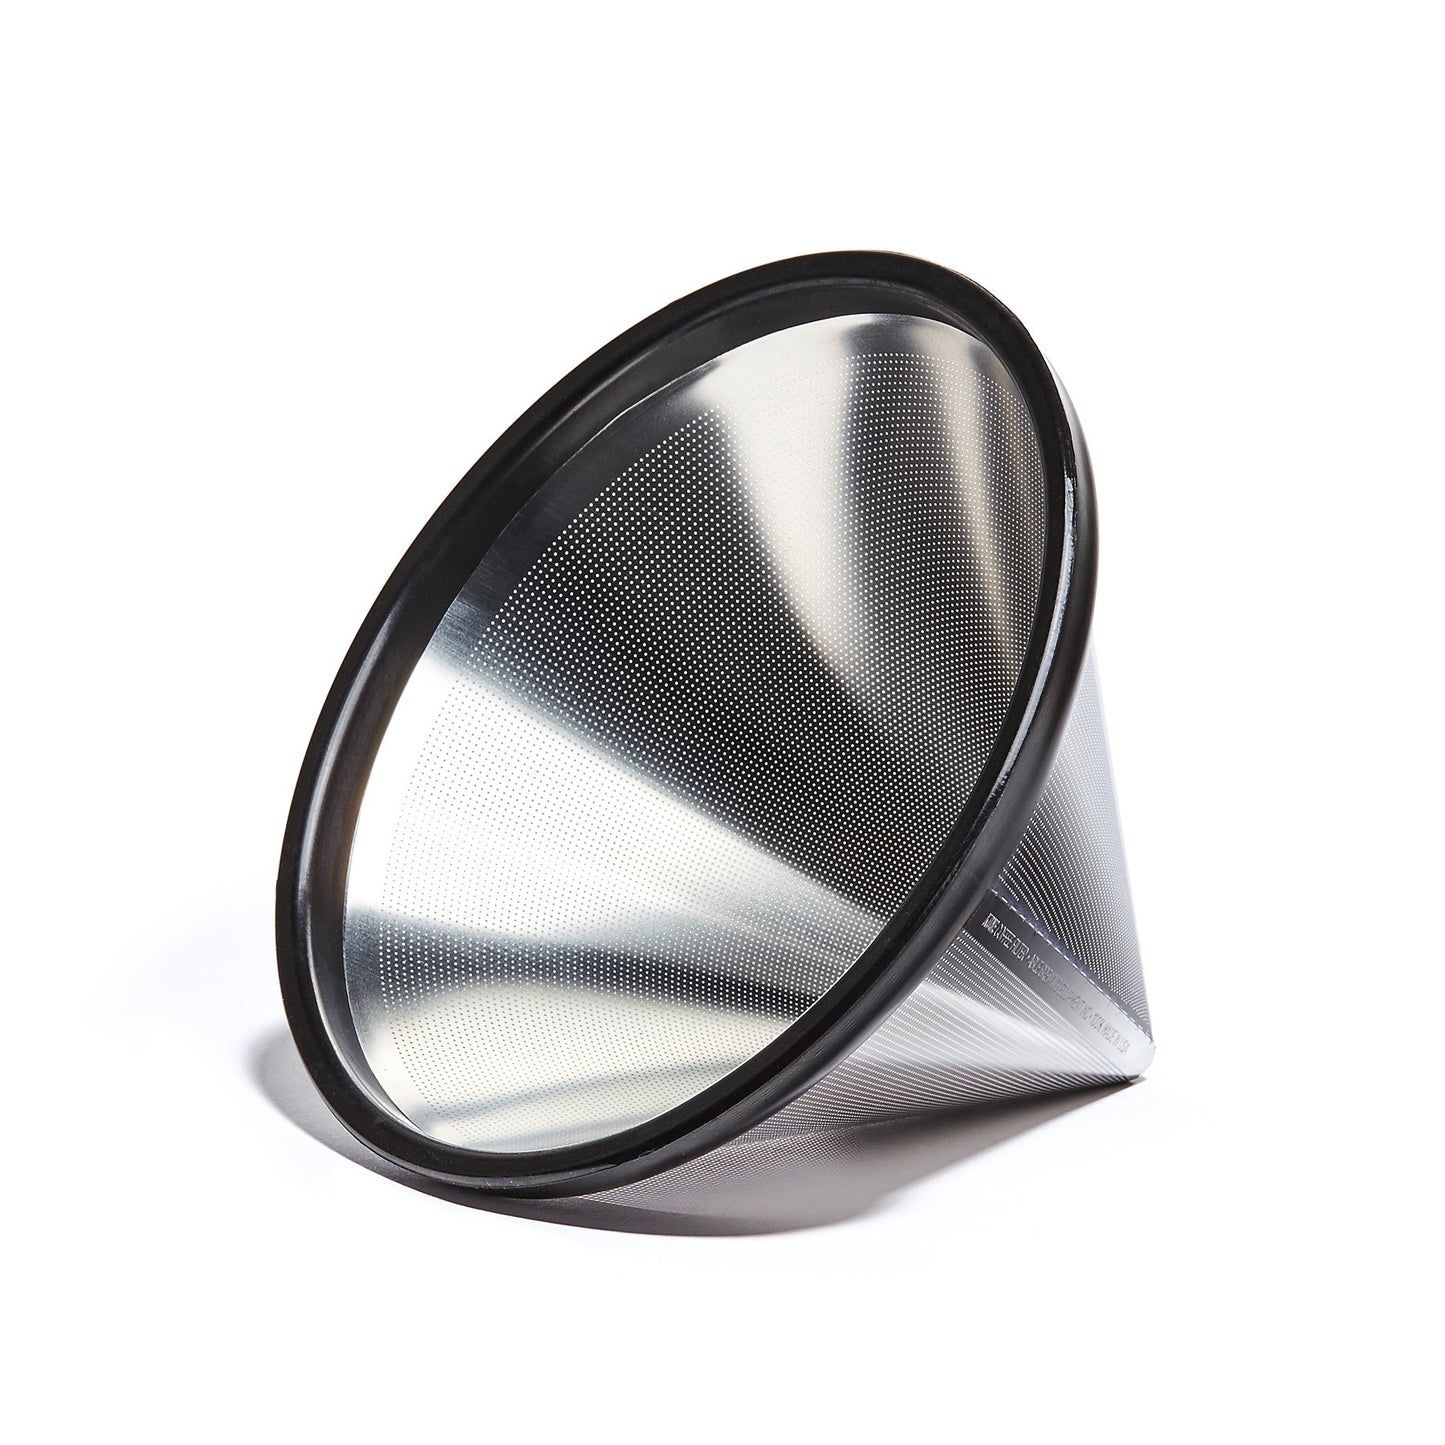 Able Kone Stainless Steel Filter for Chemex